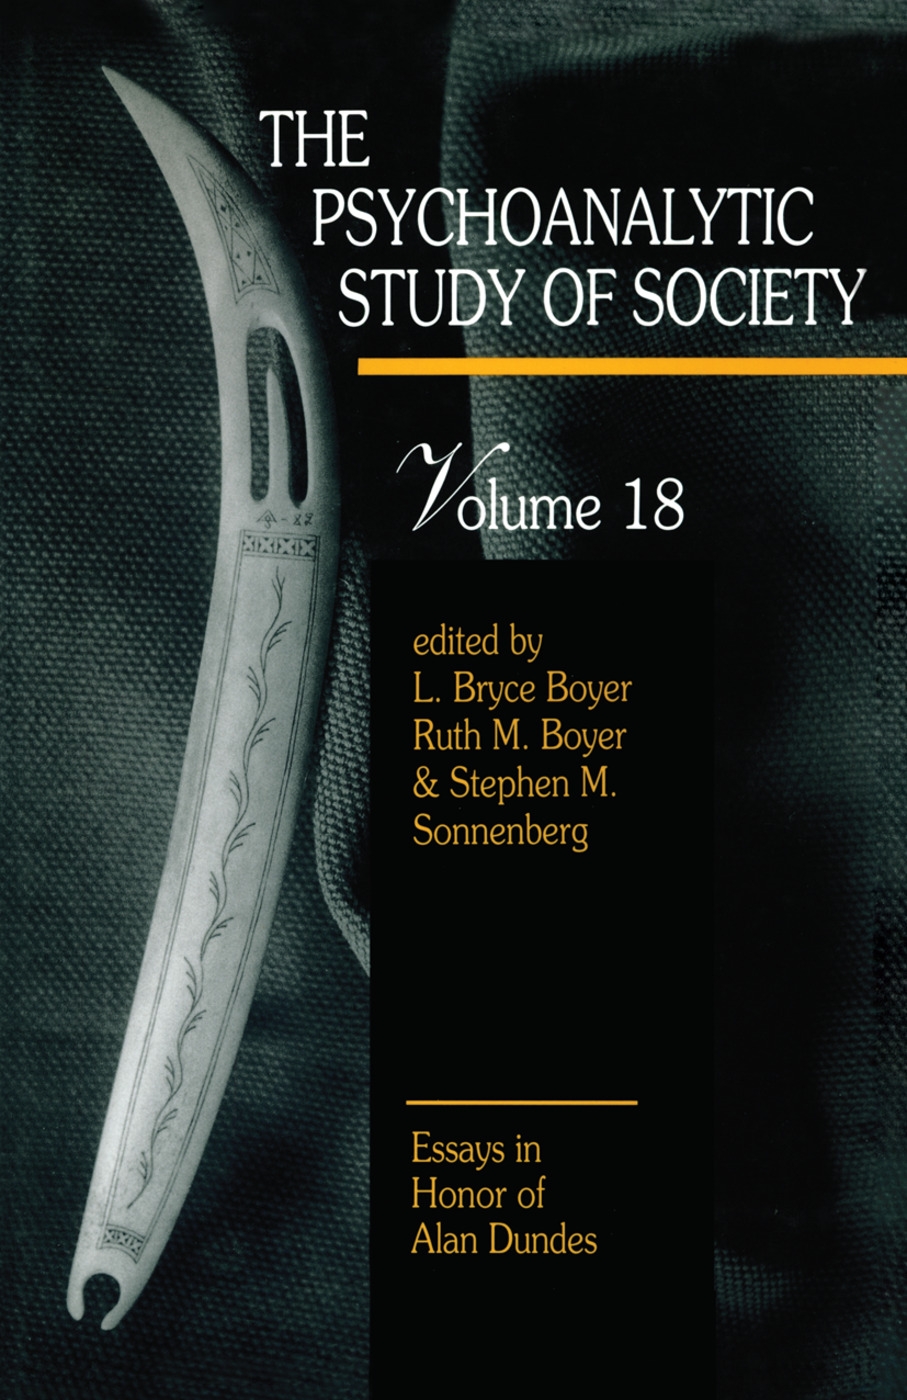 The Psychoanalytic Study of Society: Essays in Honor of Alan Dundes